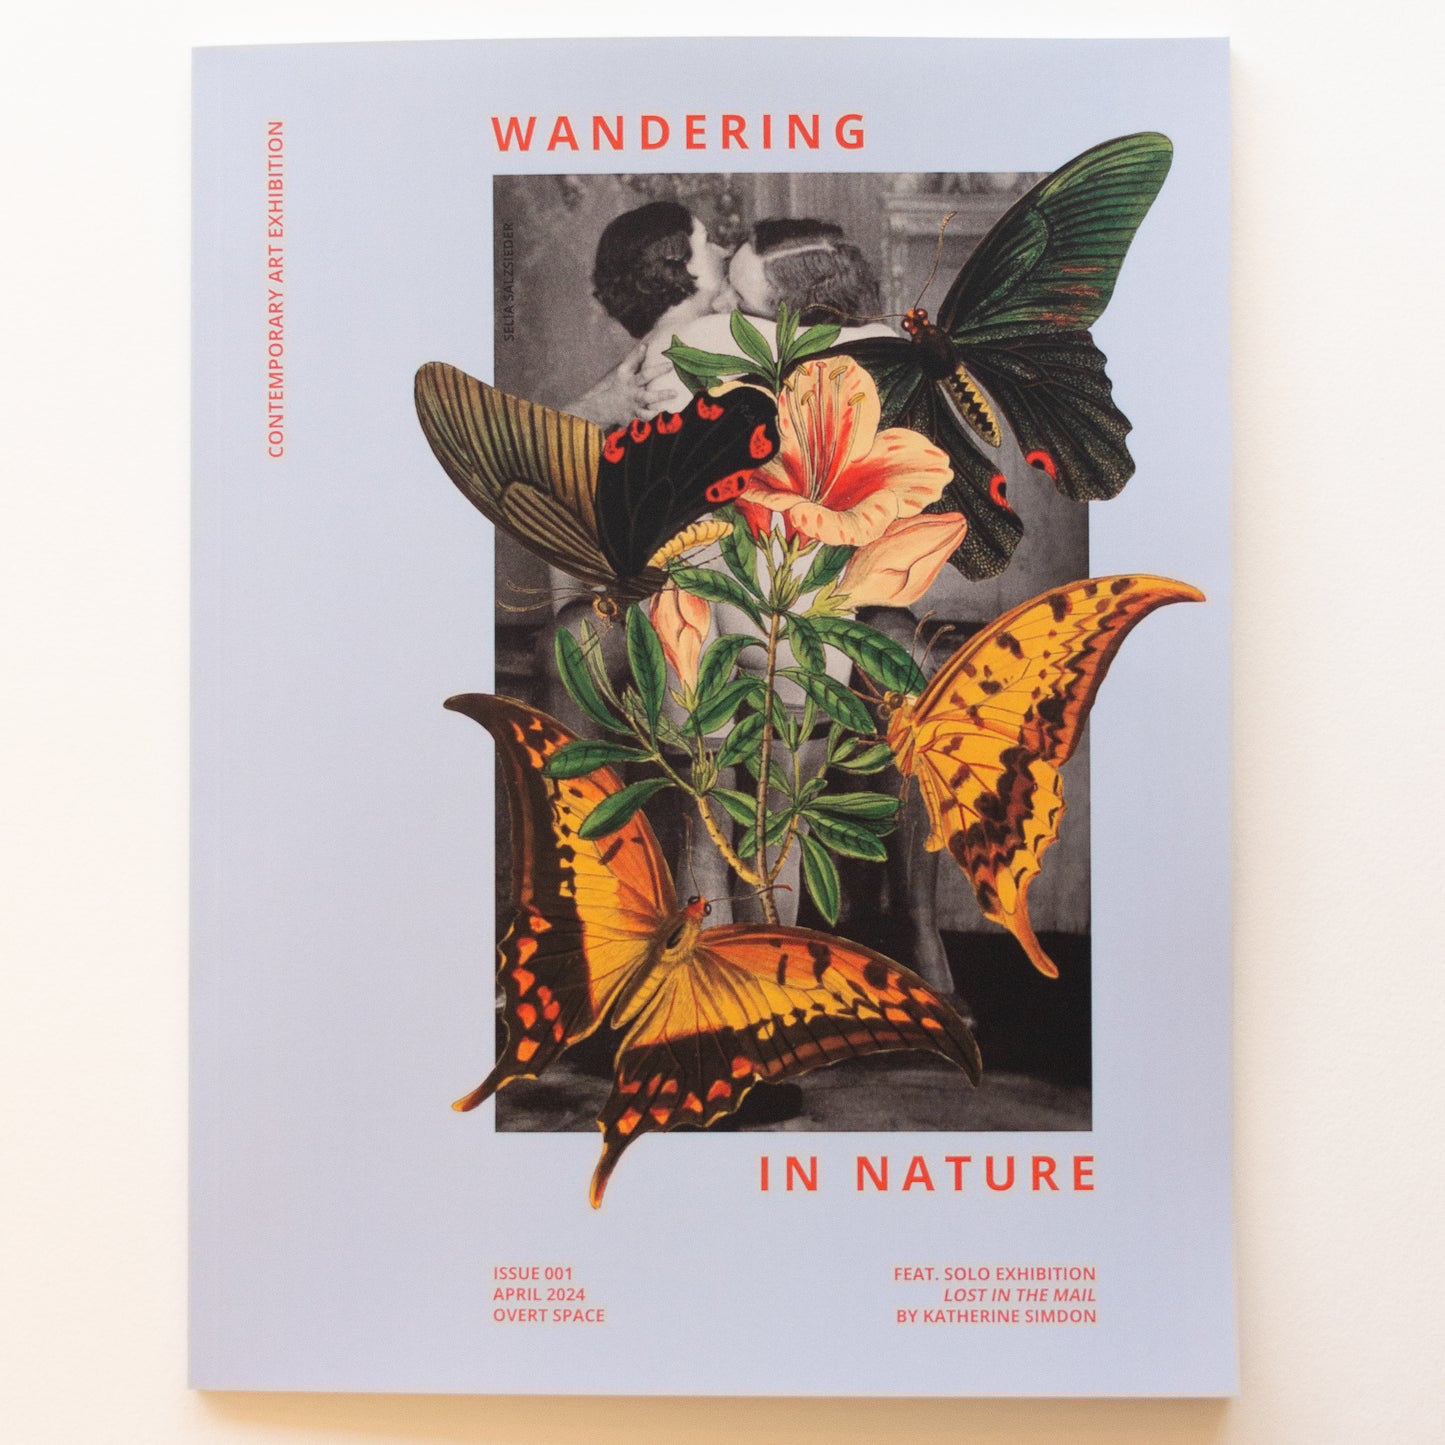 Wandering in Nature - Exhibition Catalog